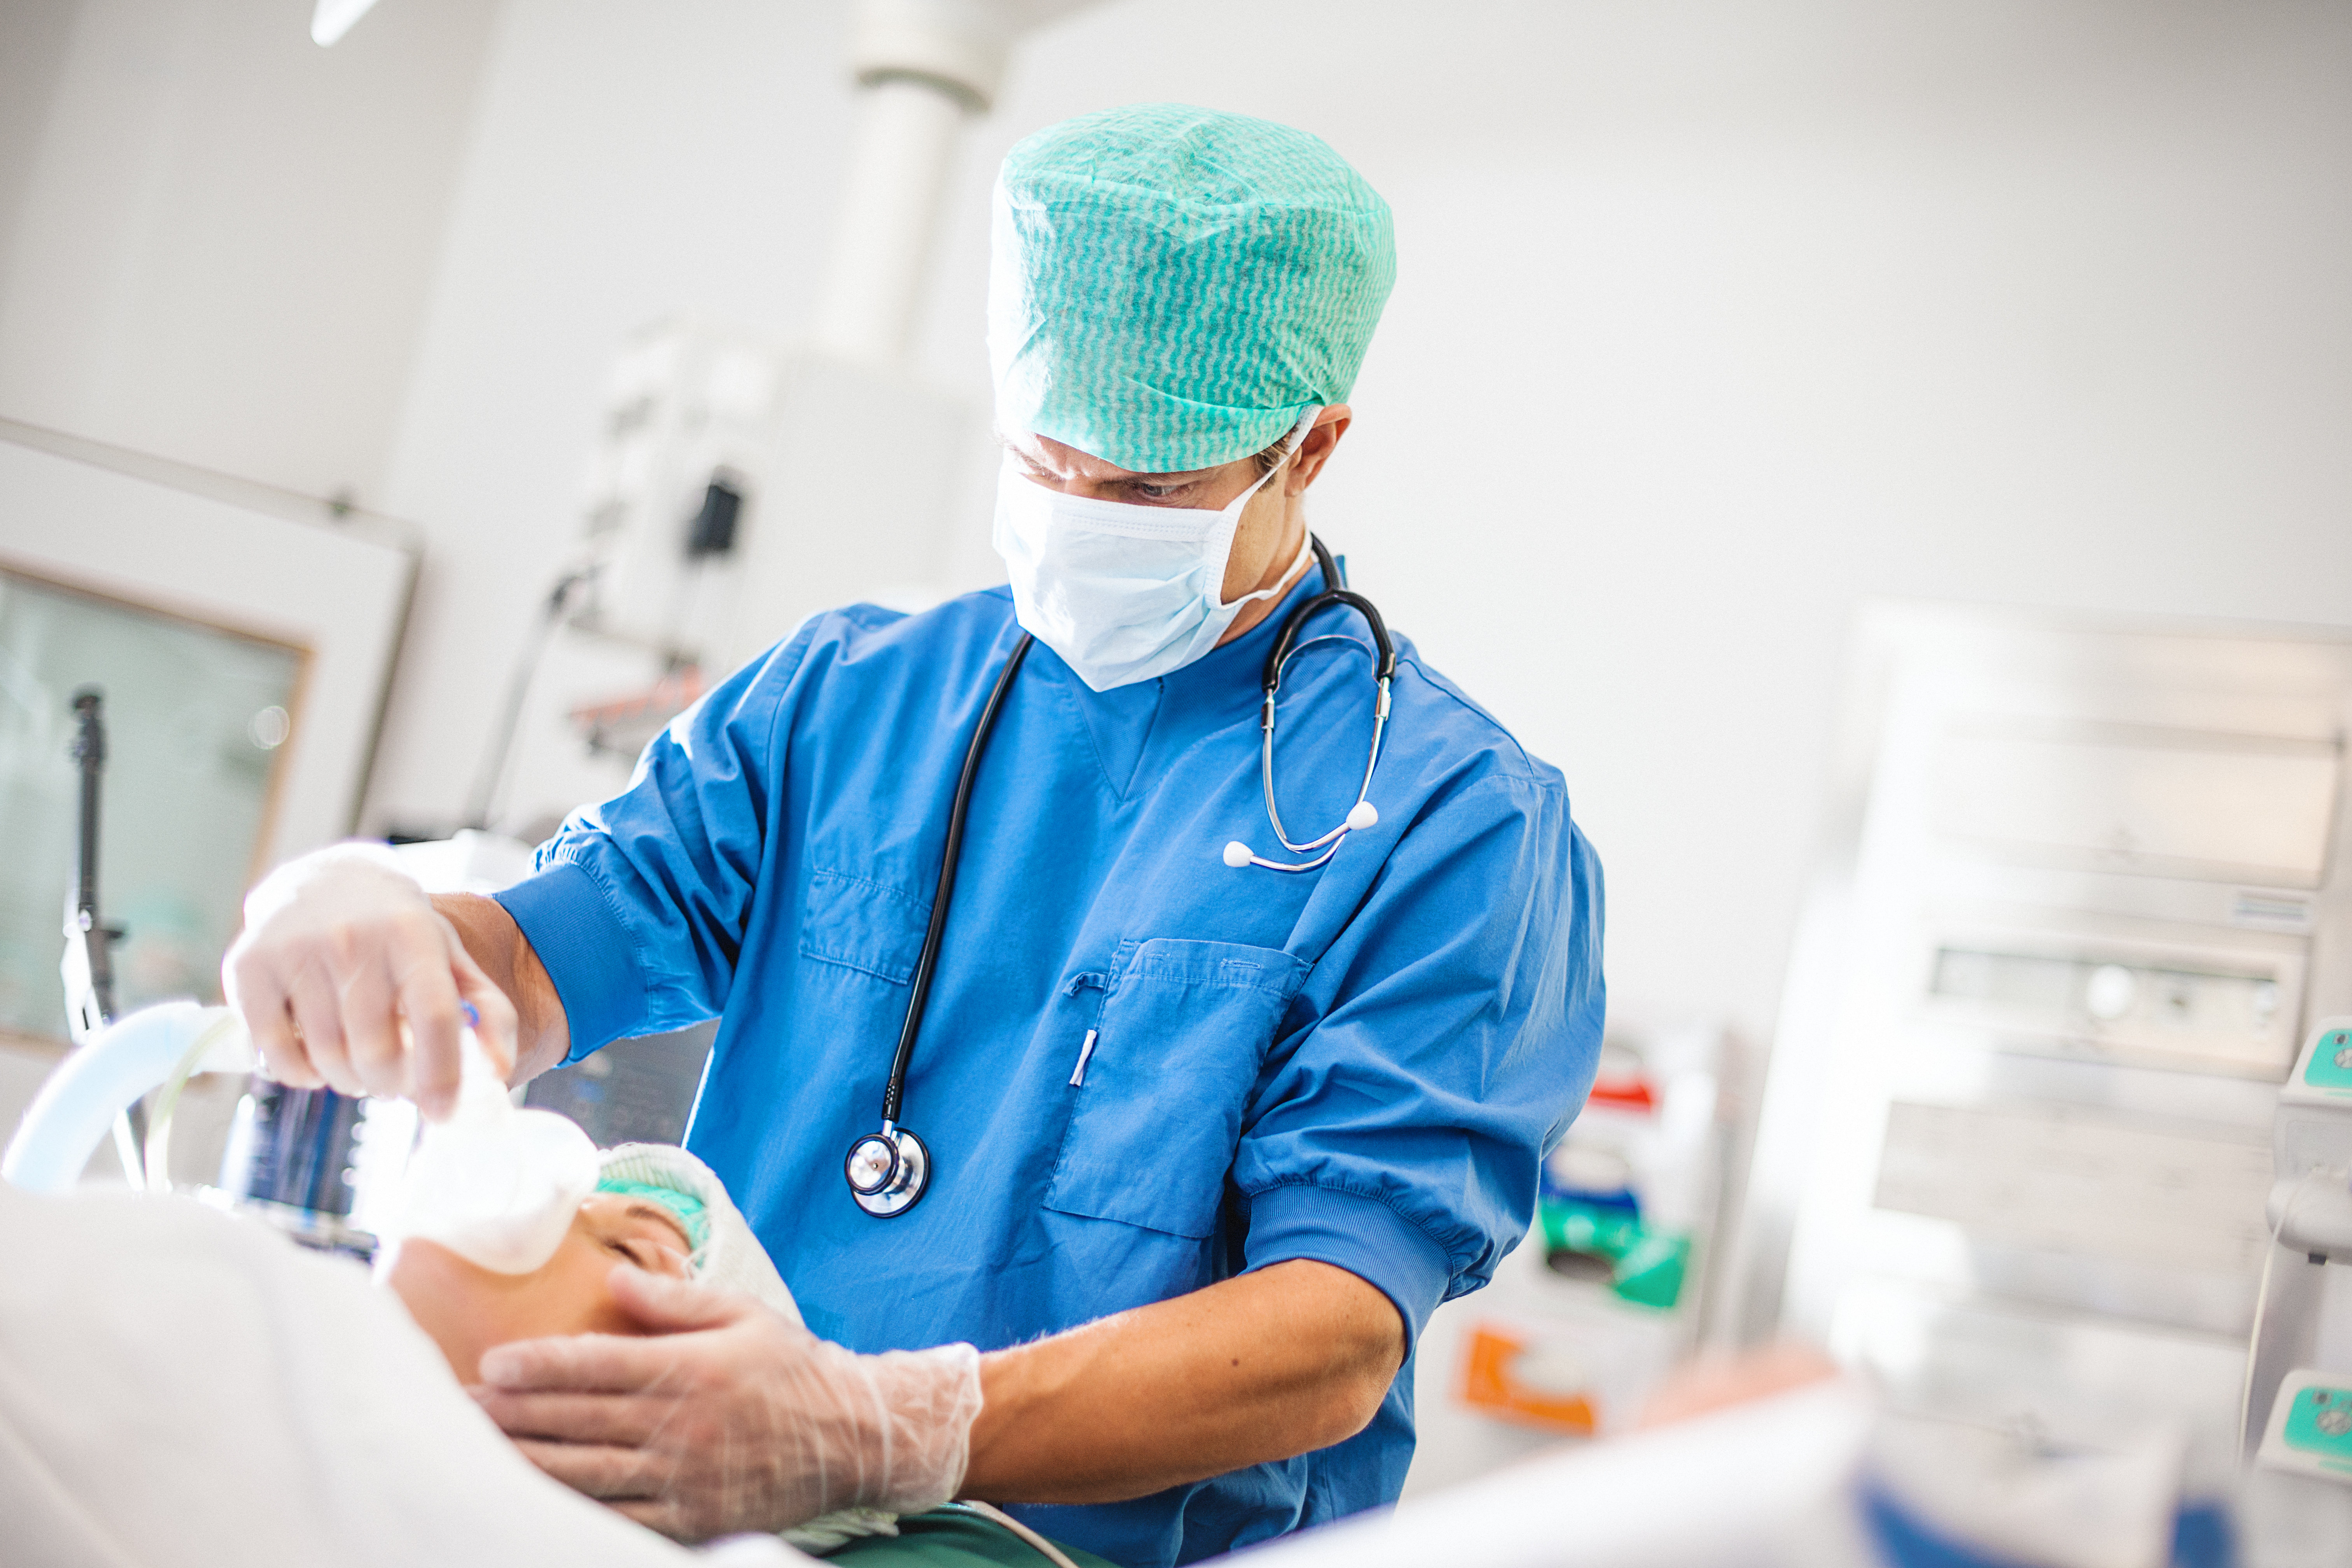 Study suggests steps to curb anesthesia-related adverse events - Photo: ©iStock/knape